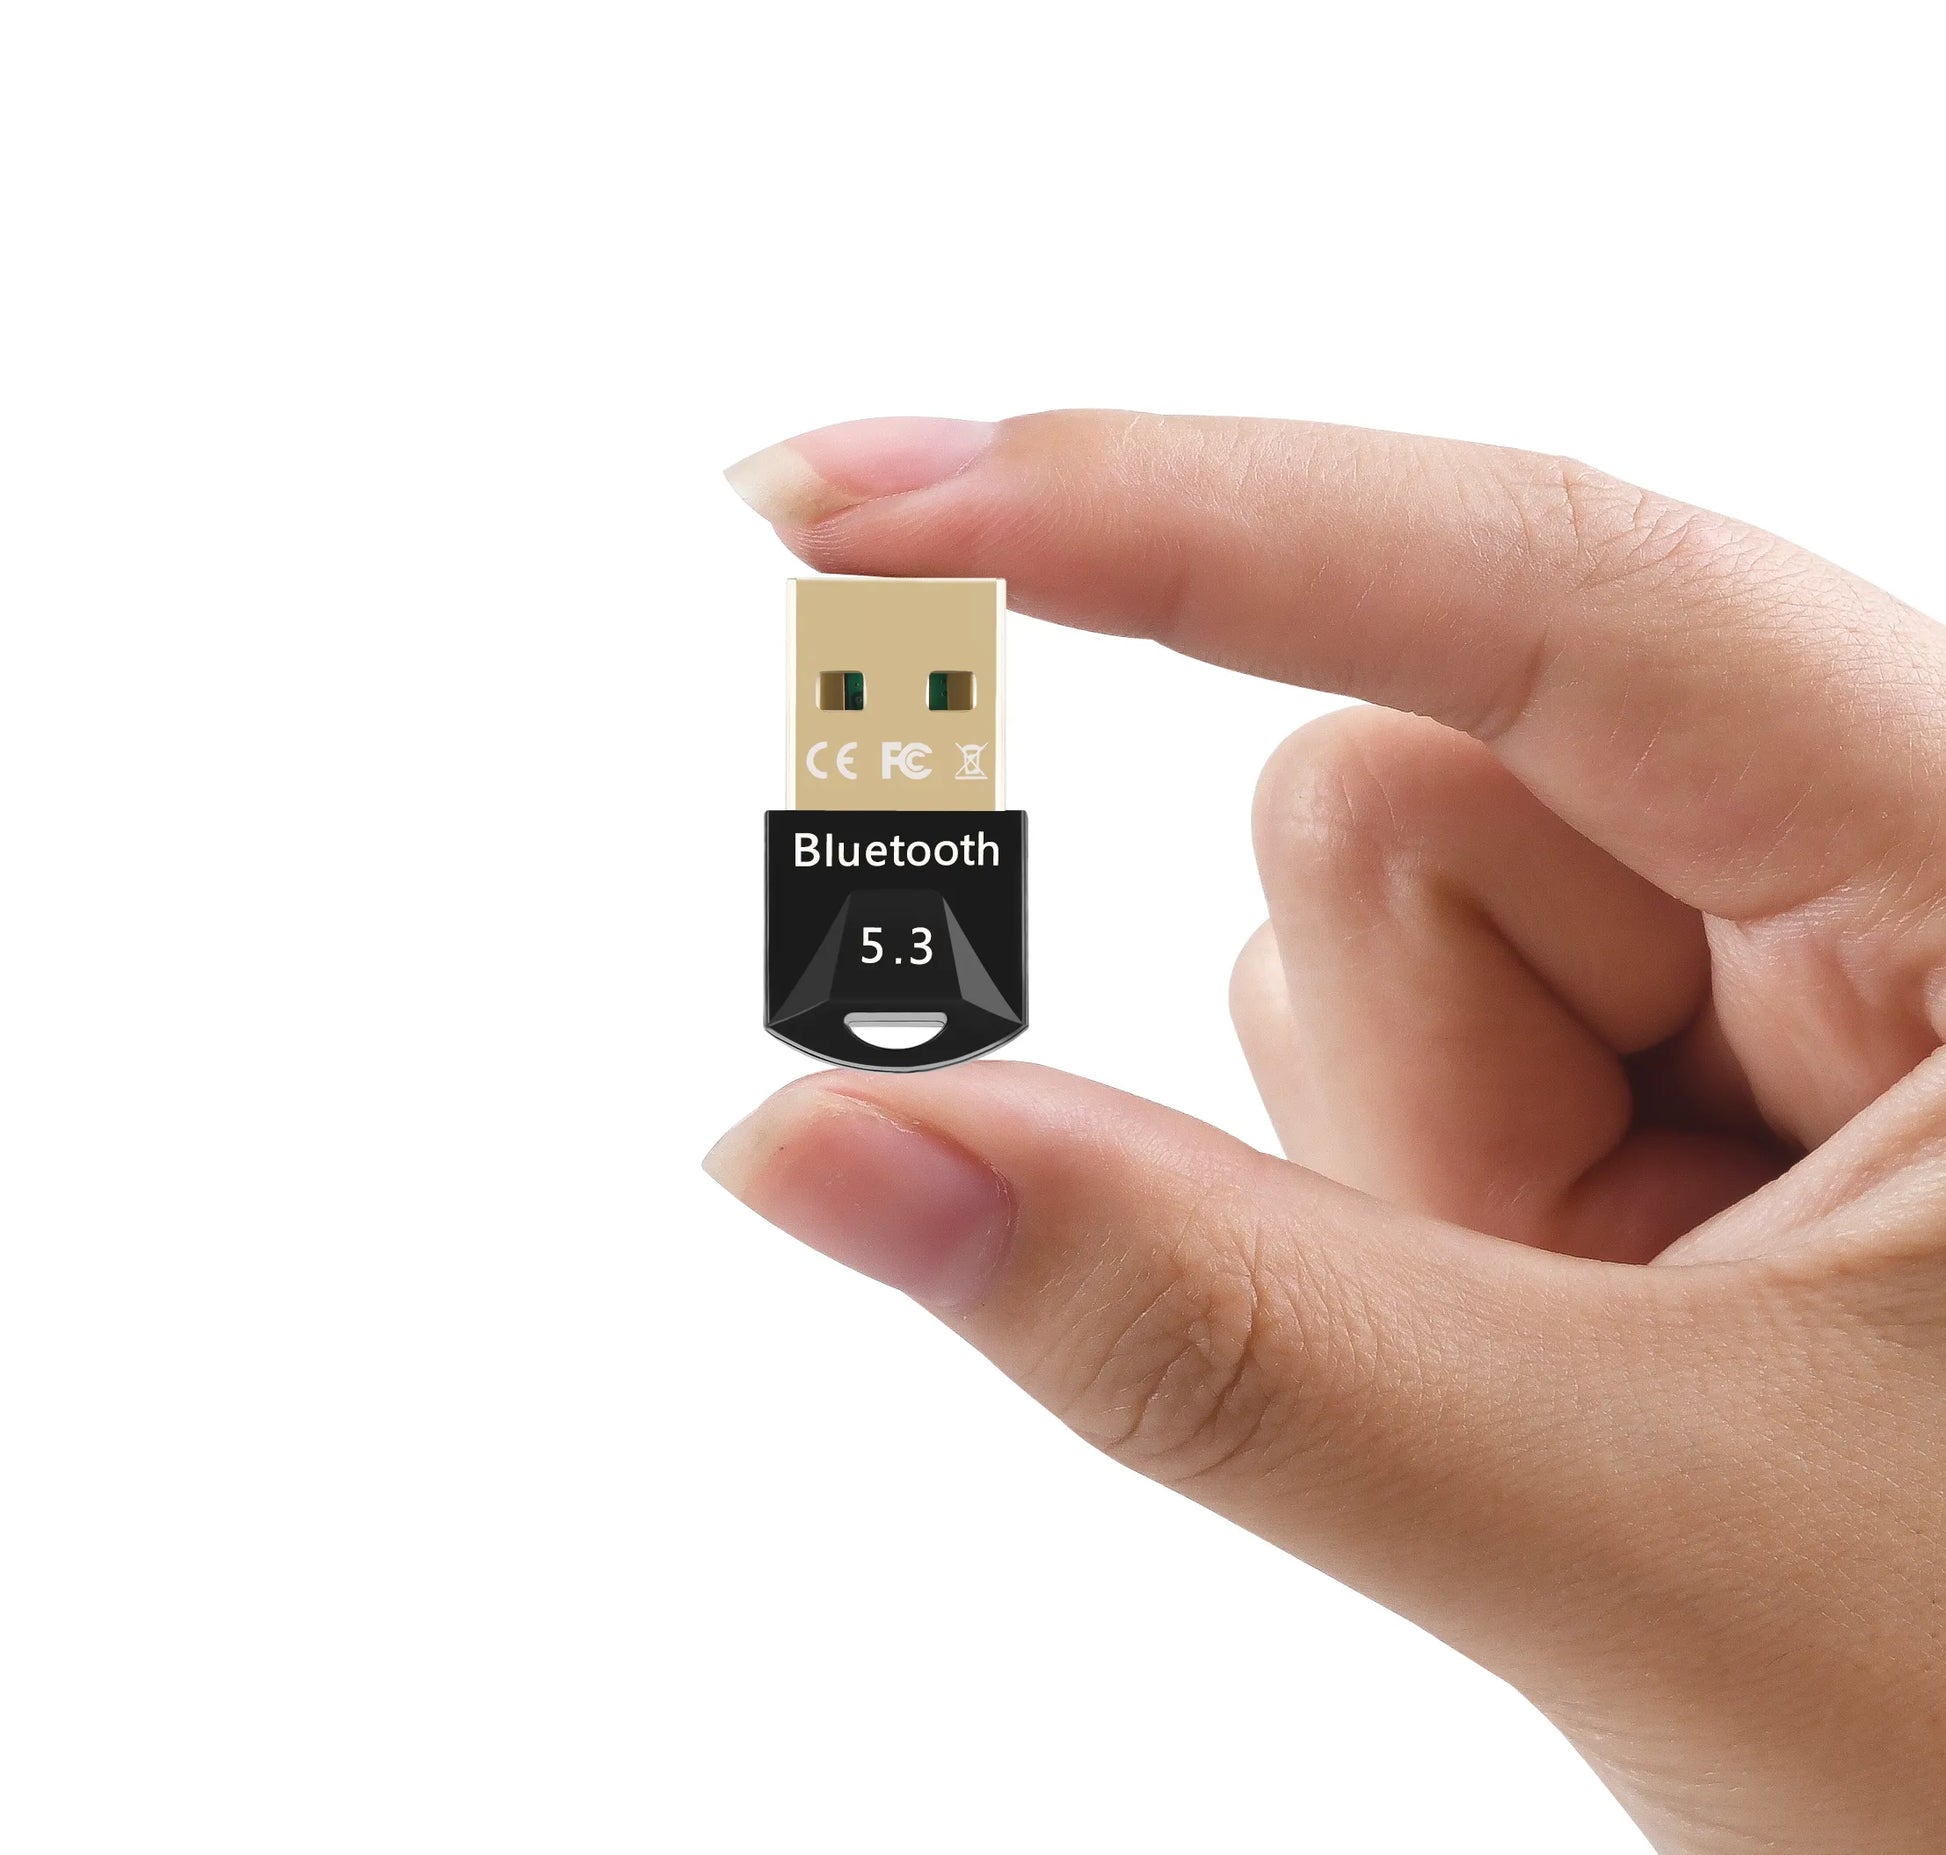  USB Bluetooth Adapter for PC 5.3 Bluetooth Dongle